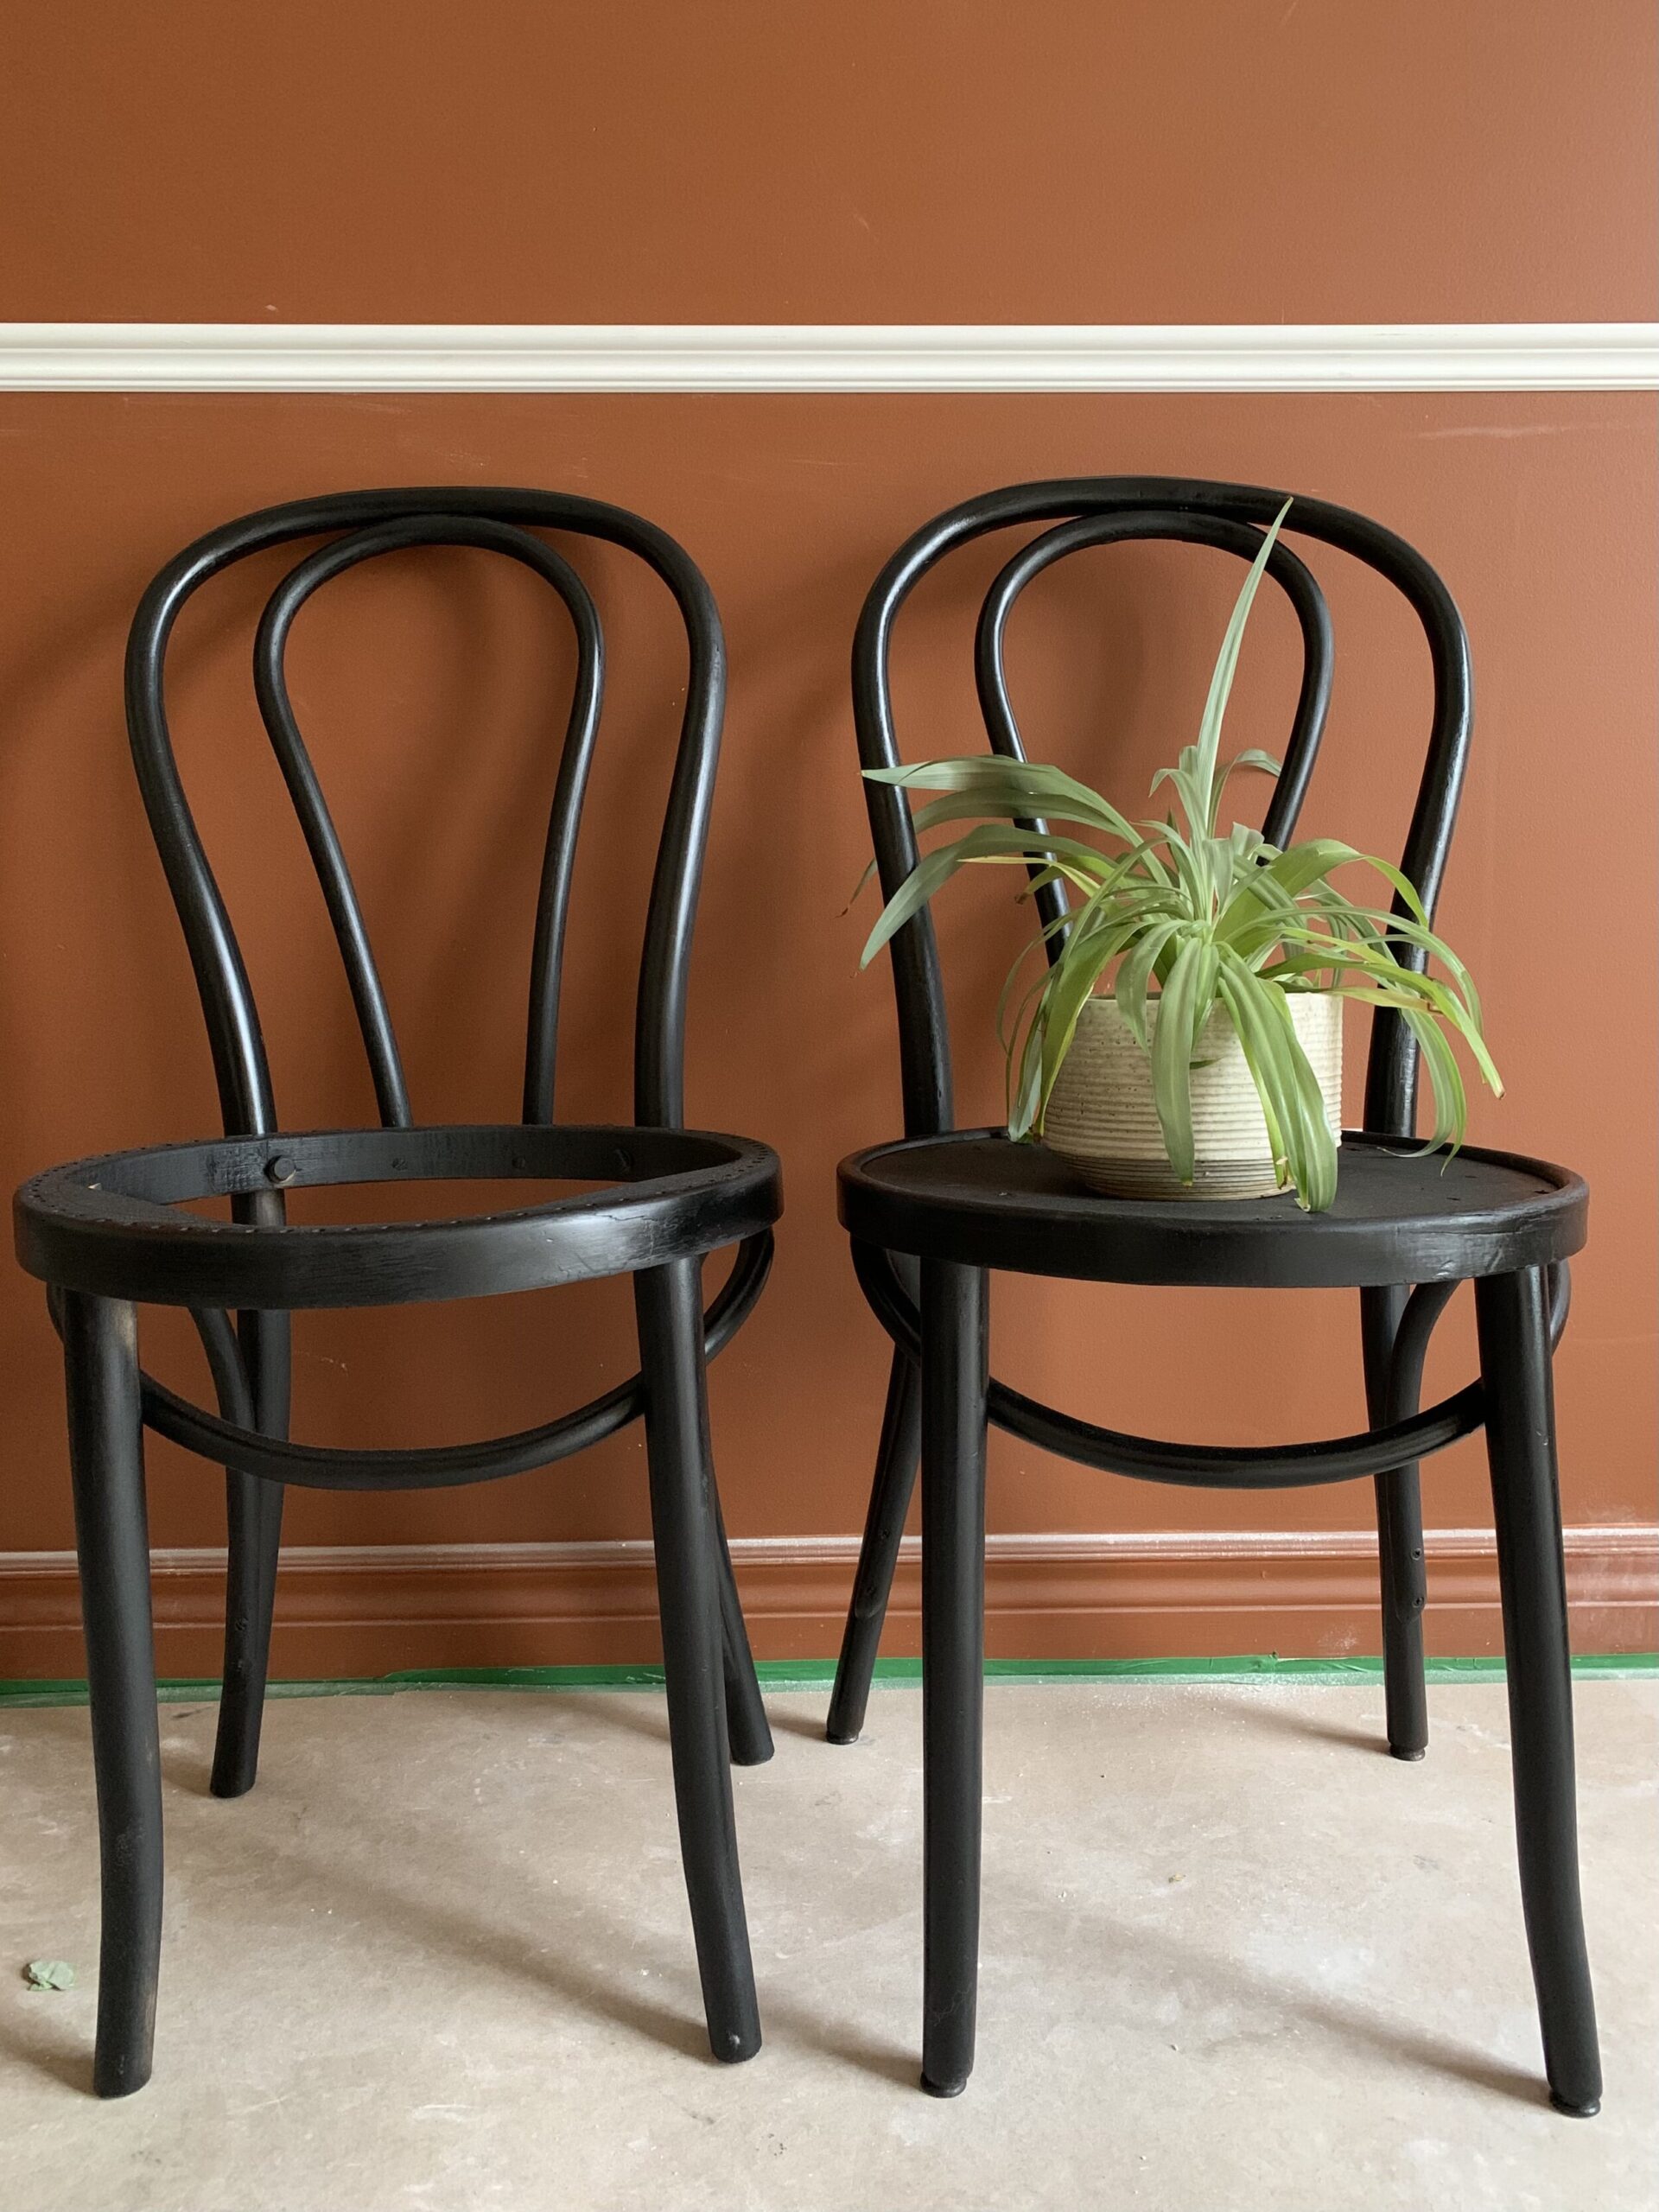 Two bentwood chairs, black, one with a plant on the seat